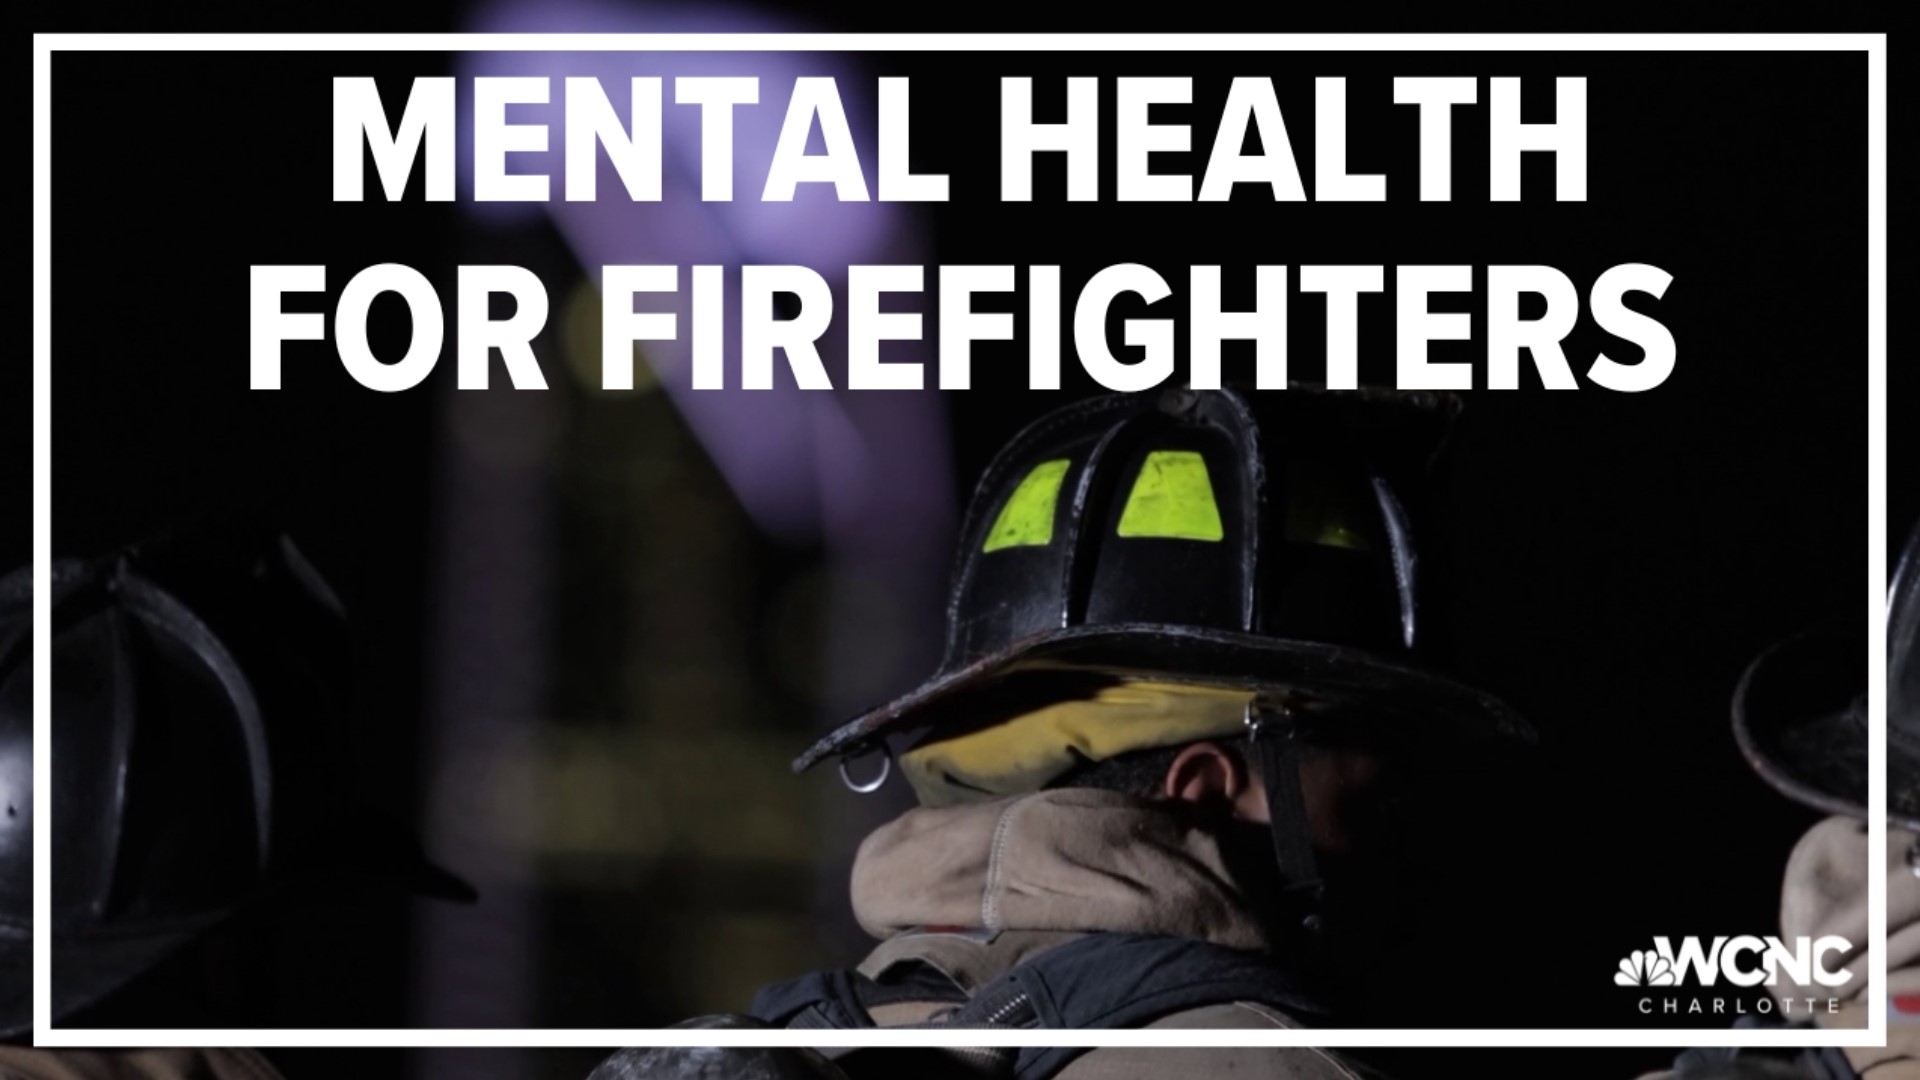 Firefighters put others' lives ahead of their own and are seen as heroes, but they say, it's time to open up the dialogue.